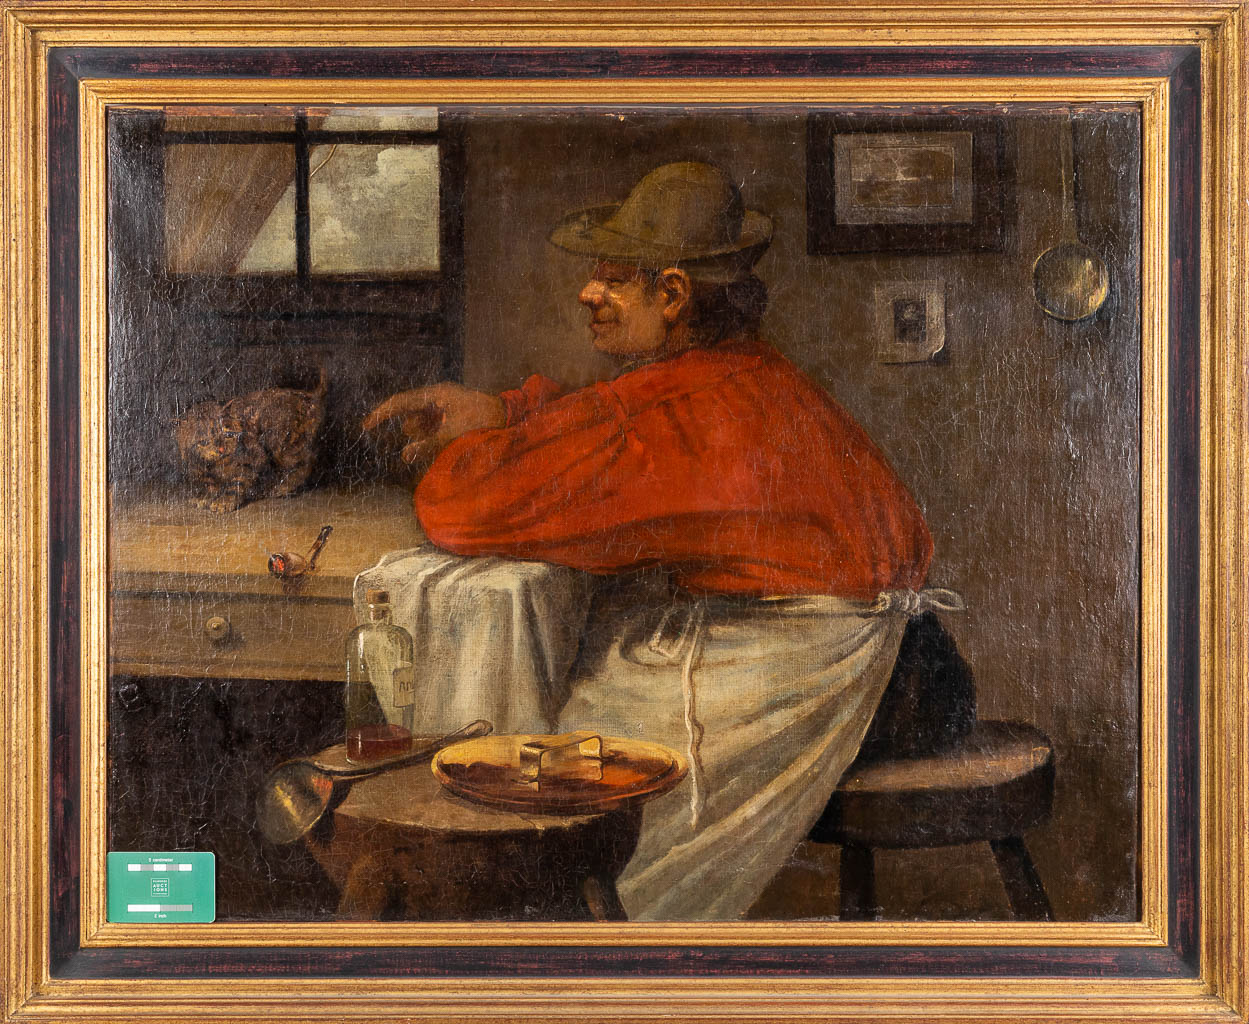 Farmer with a cat, a painting, oil on canvas. No signature found. 19th C. (W: 81 x H: 65 cm)